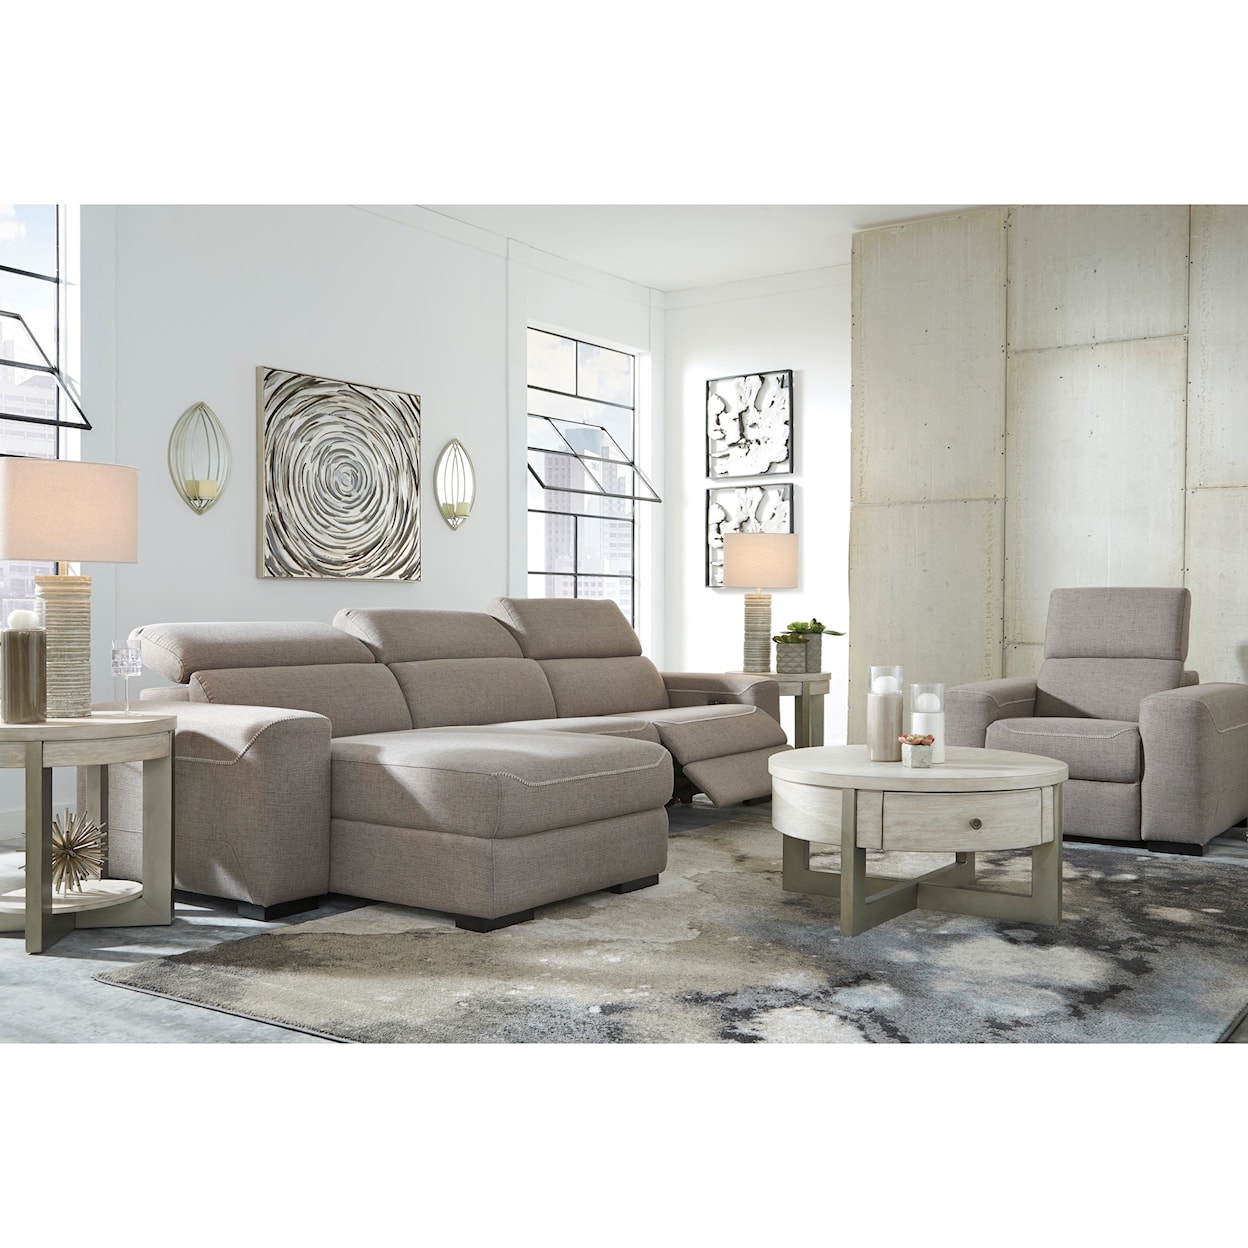 Signature Design by Ashley Mabton Power Reclining Living Room Group